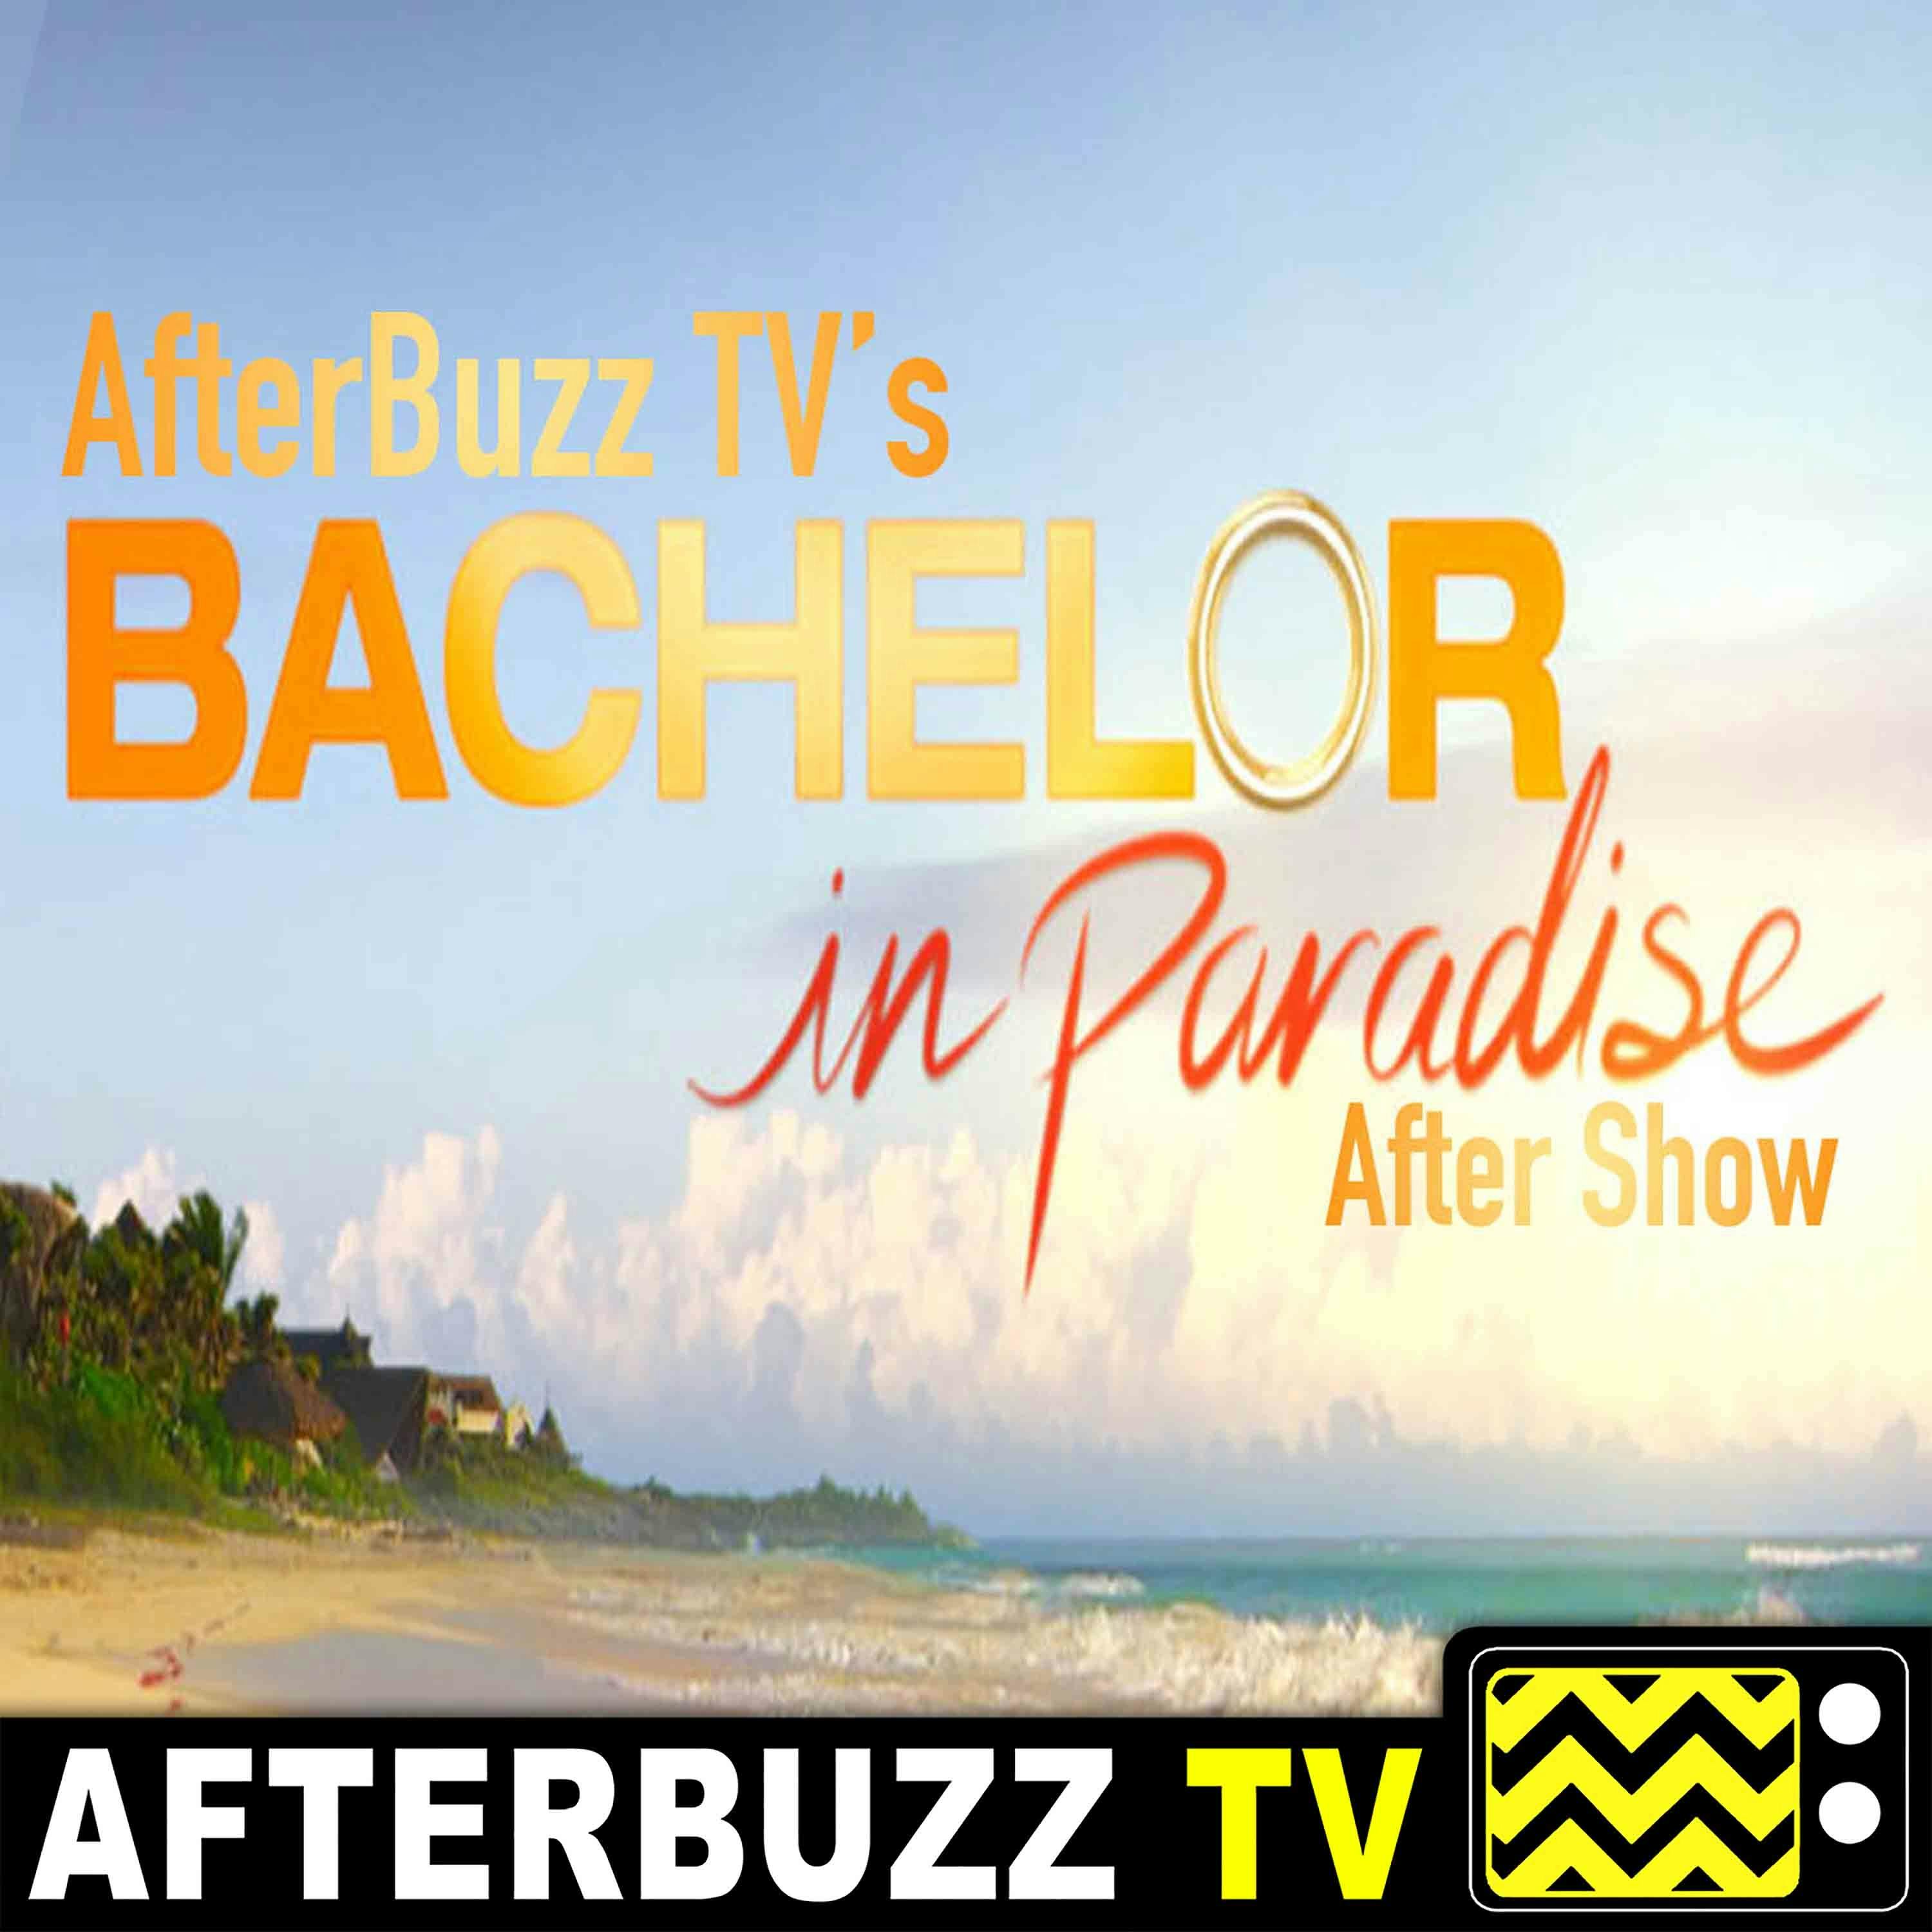 Bachelor In Paradise S:5 | Episodes 8 & 9 | AfterBuzz TV AfterShow